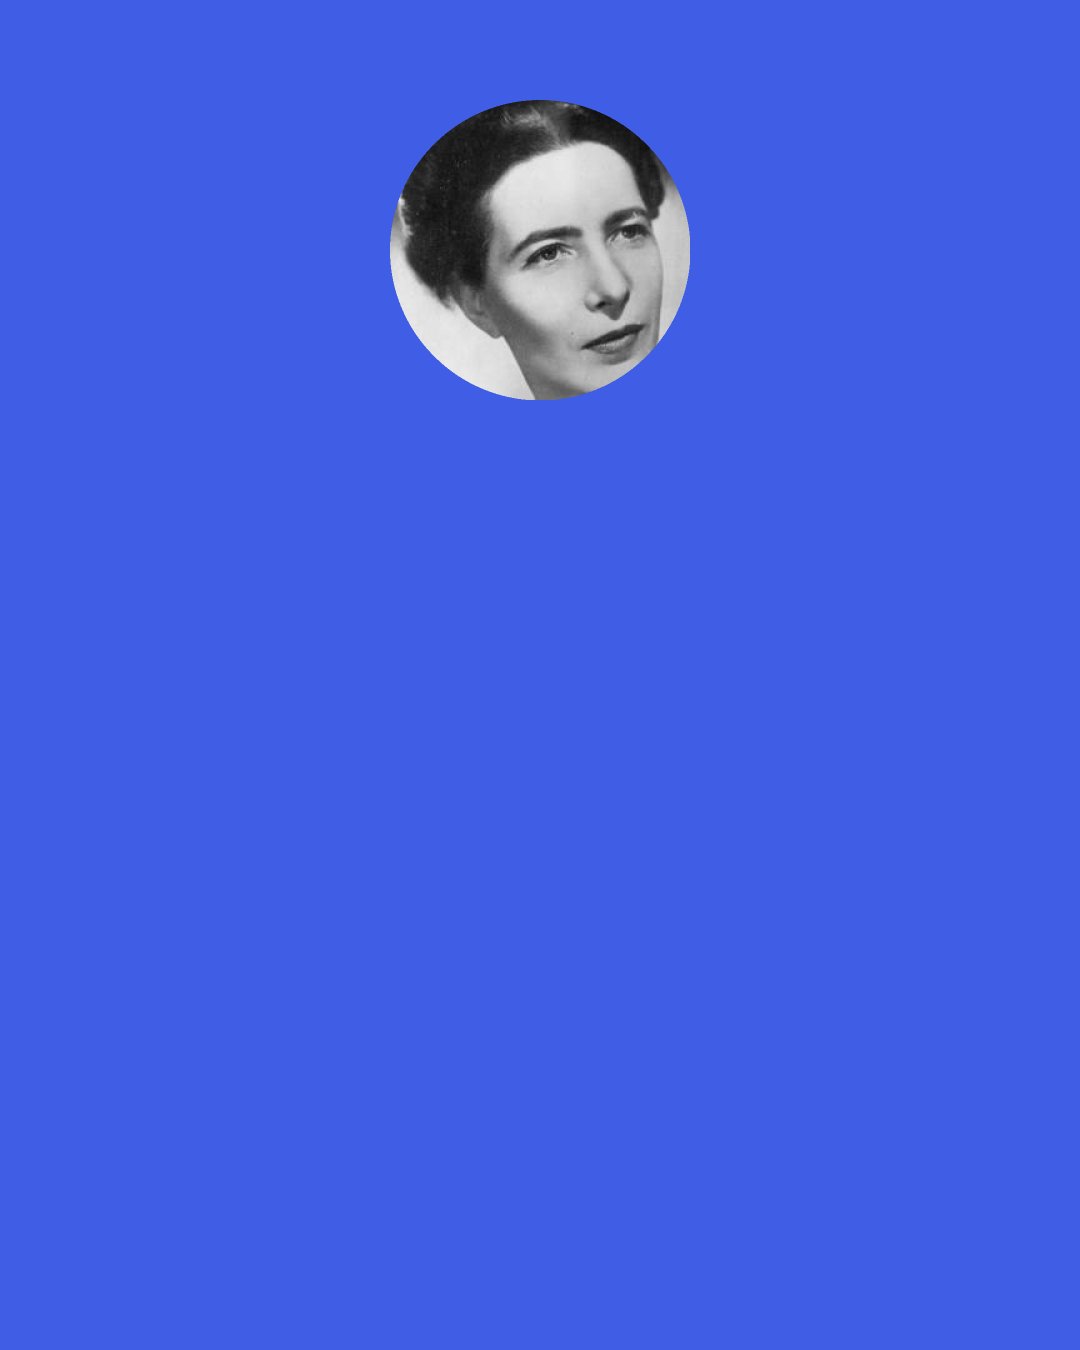 Simone de Beauvoir: All the opportunities you let slip by! The idea, the inspiration just doesn´t come fast enough. Instead of being open, you´re closed up tight. That´s the worst sin of all - the sin of omission.